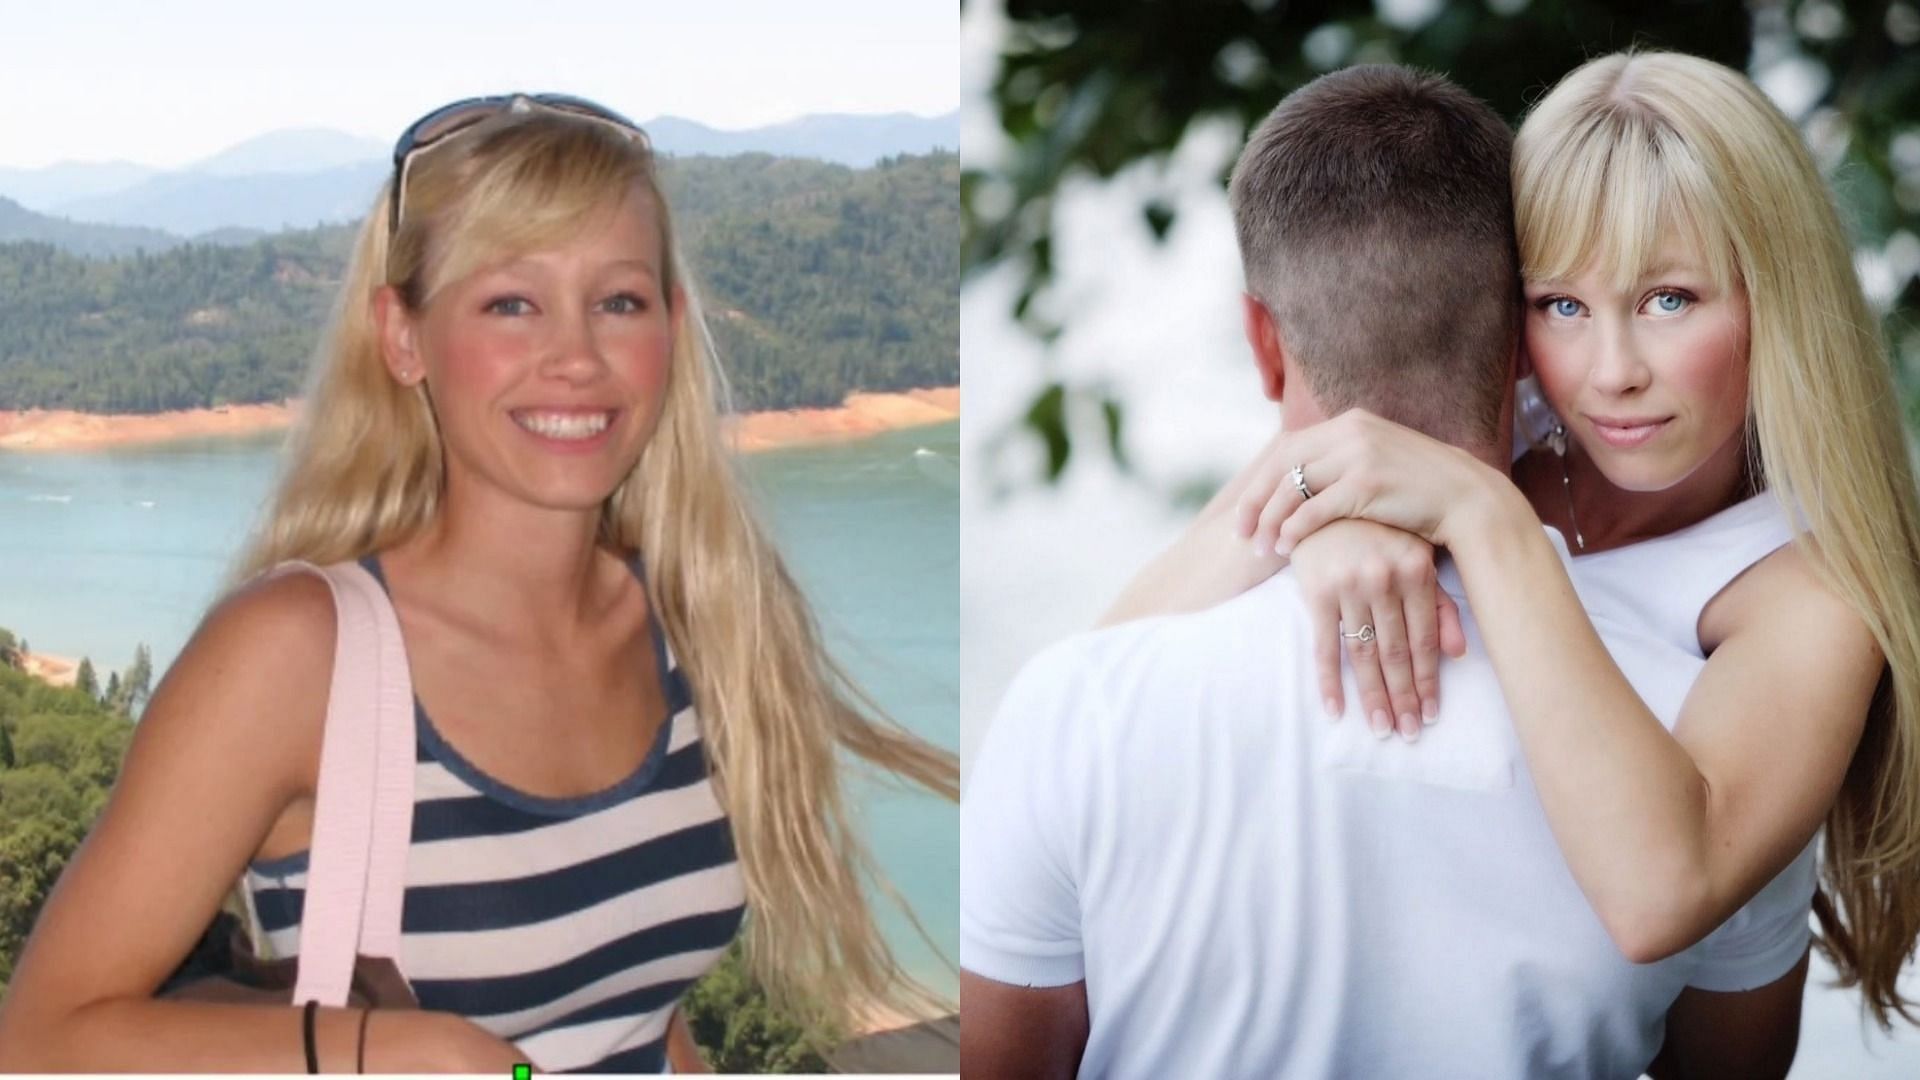 Sherri Papini has been charged for allegedly falsifiying her abduction (Image via Gadi Schwartz/Twitter and Paula Neal Mooney/Twitter)